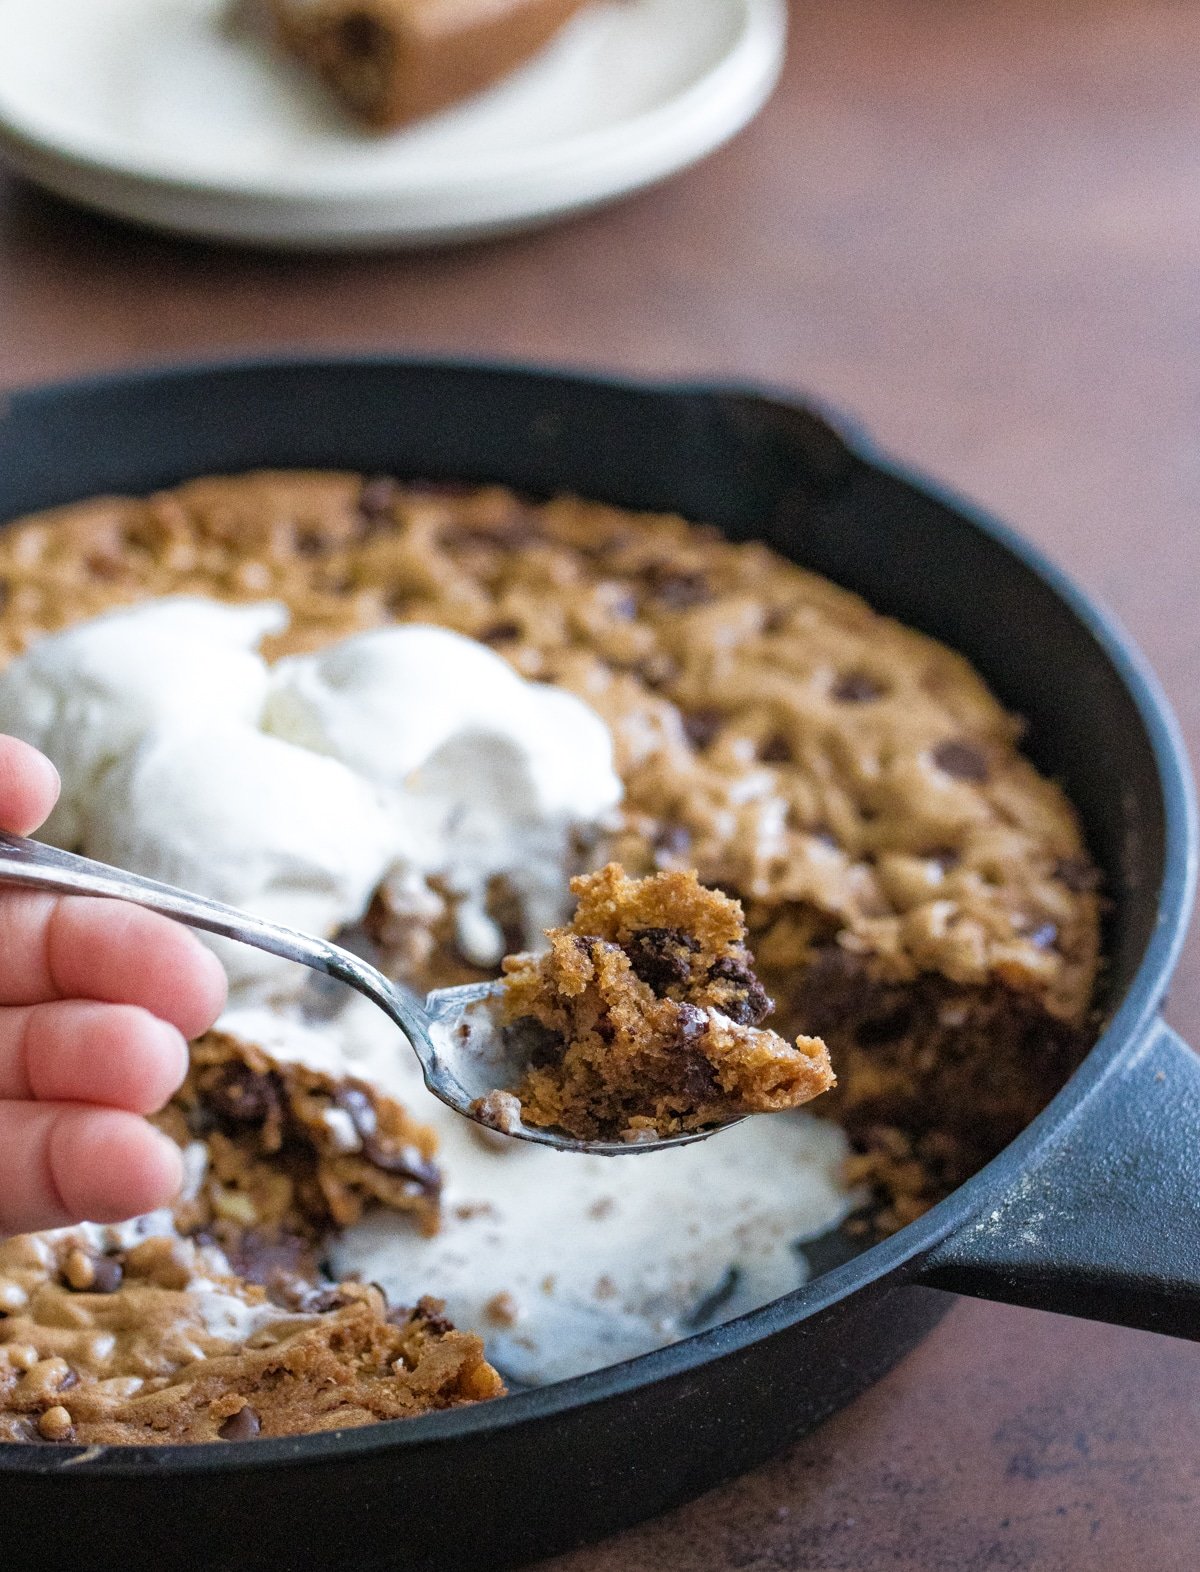 Chocolate chip skillet cookie in a cast iron skillet with scoops of vanilla cream on top and scooping some out with a spoon.